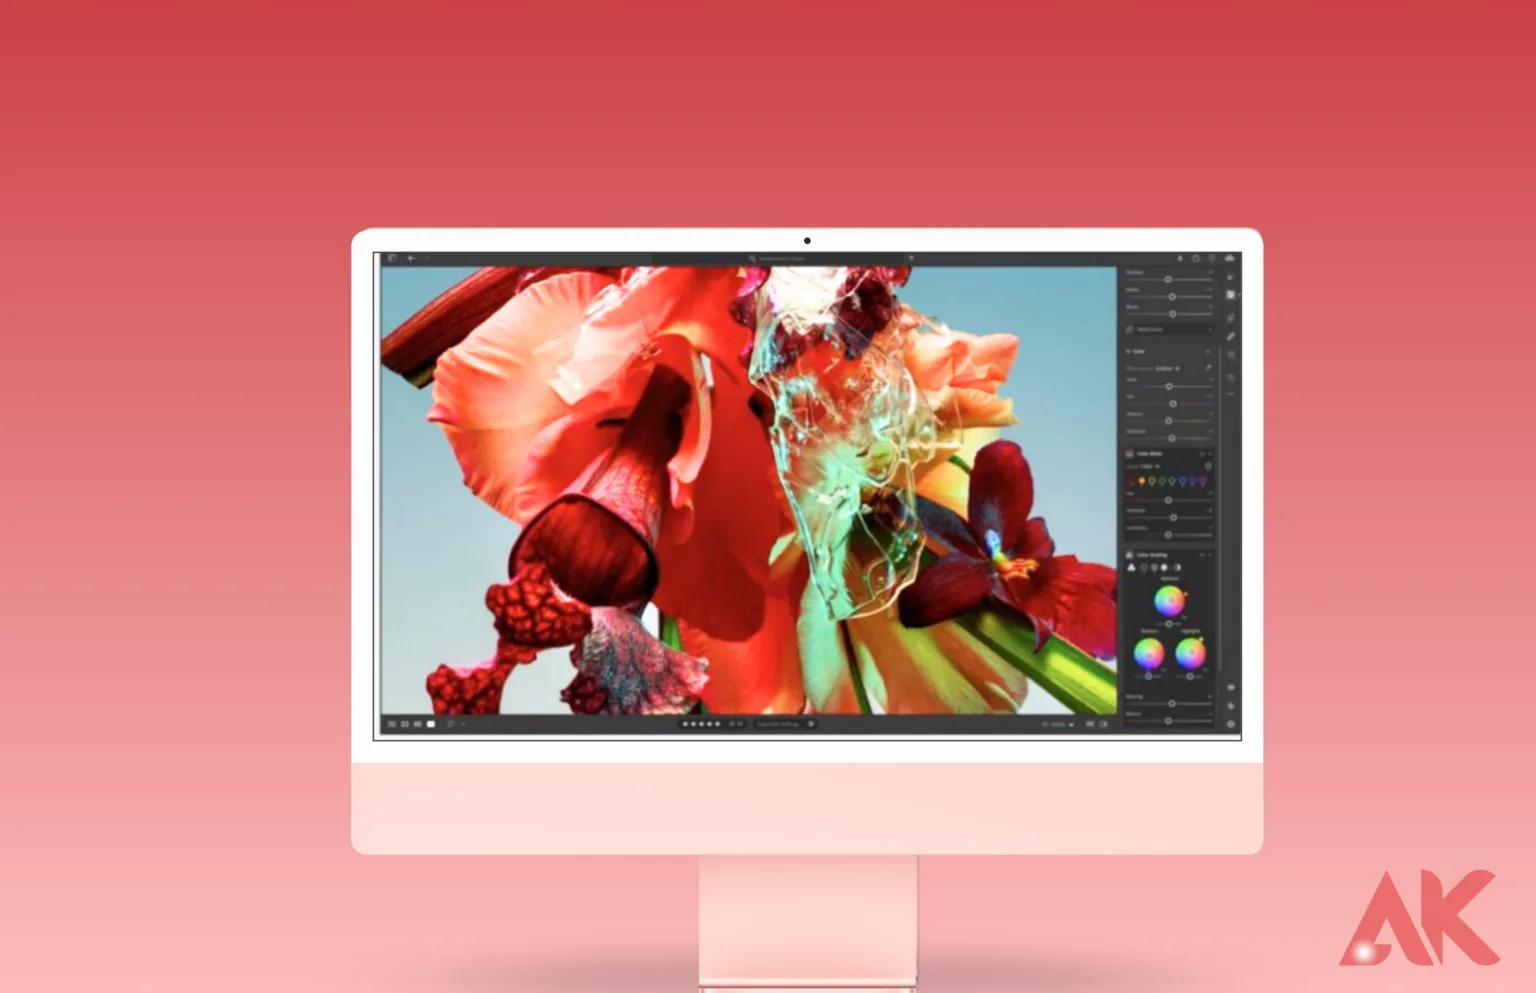 M3 iMac Features: The Top New Features and Improvements to Expect